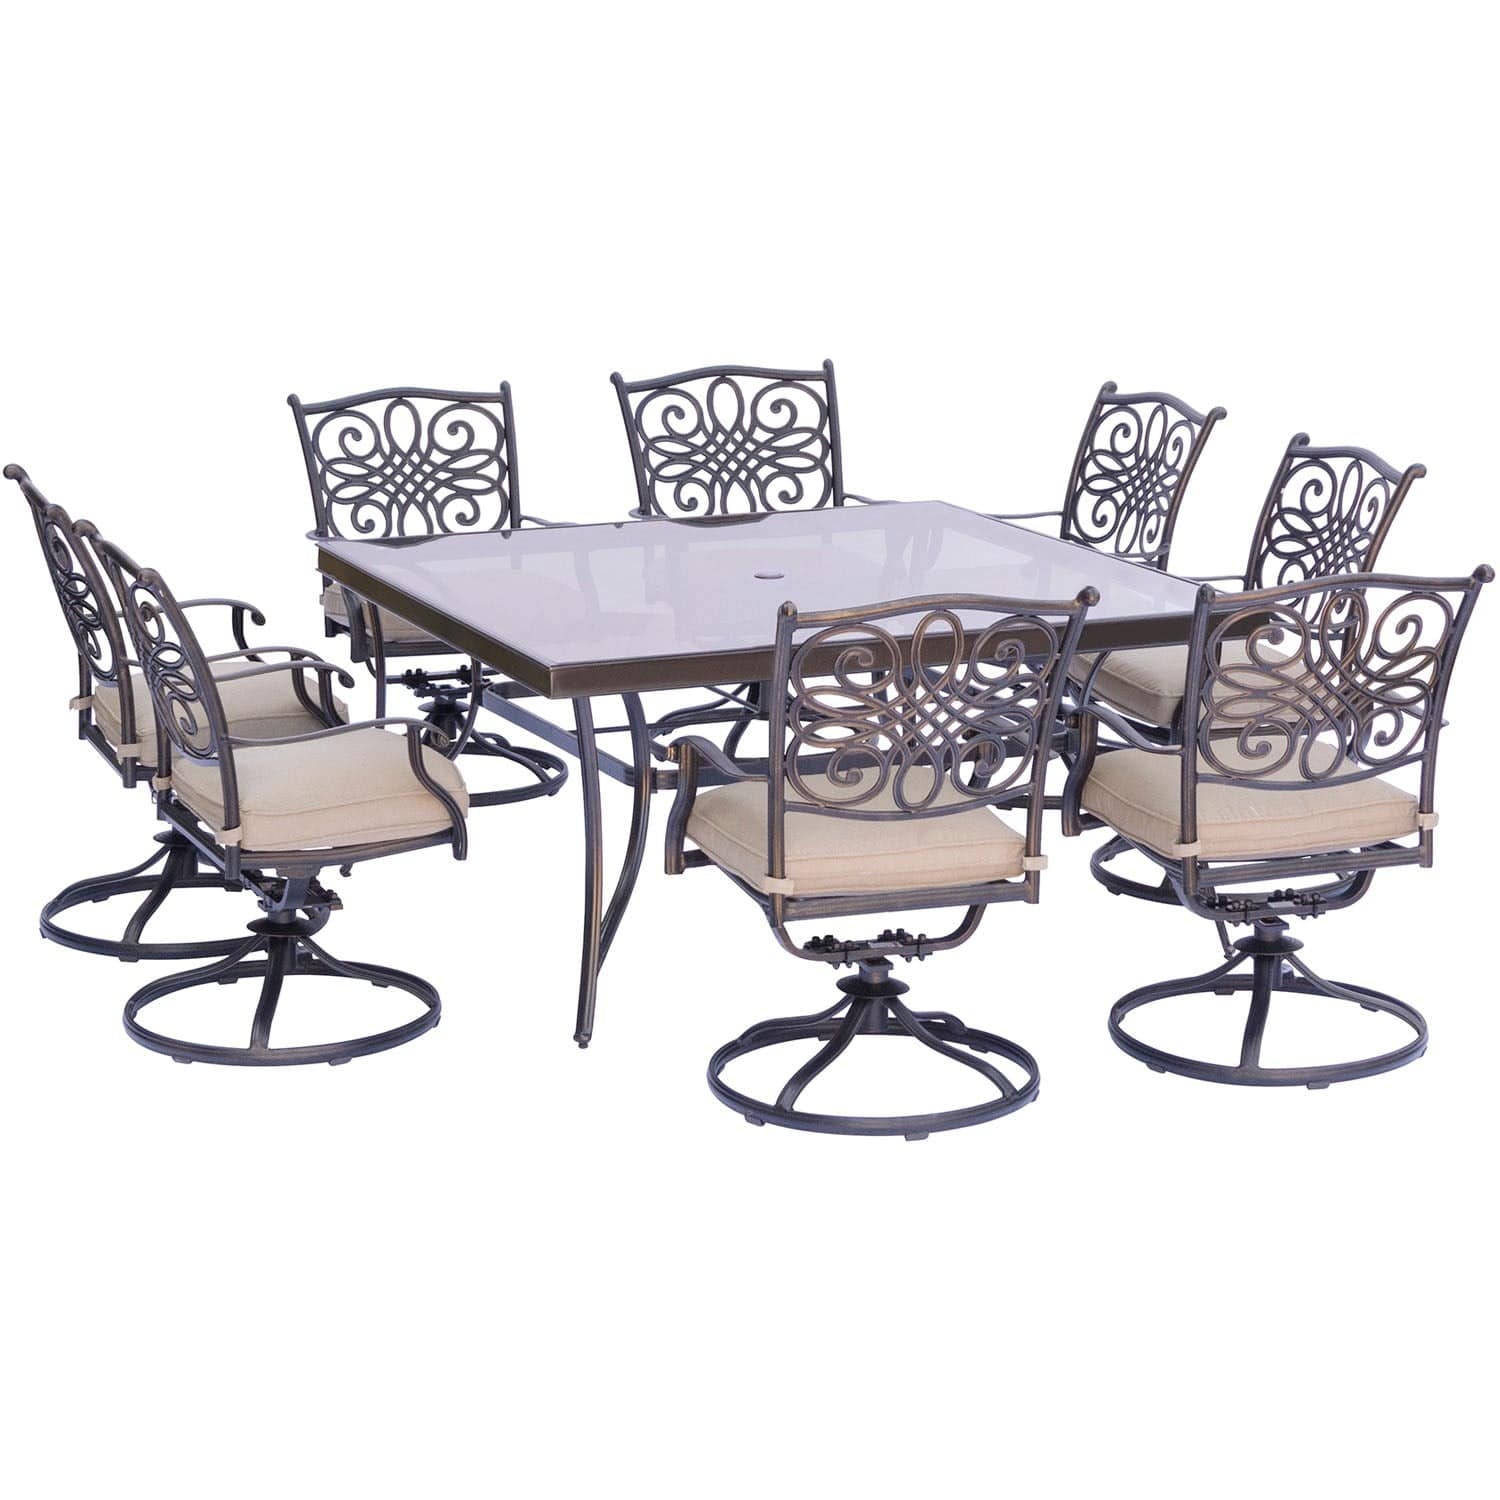 Hanover - Traditions 9-Piece  Aluminium Frame Dining Set in Tan with a 60 In. Square Glass-Top Dining Table | TRADDN9PCSWSQG